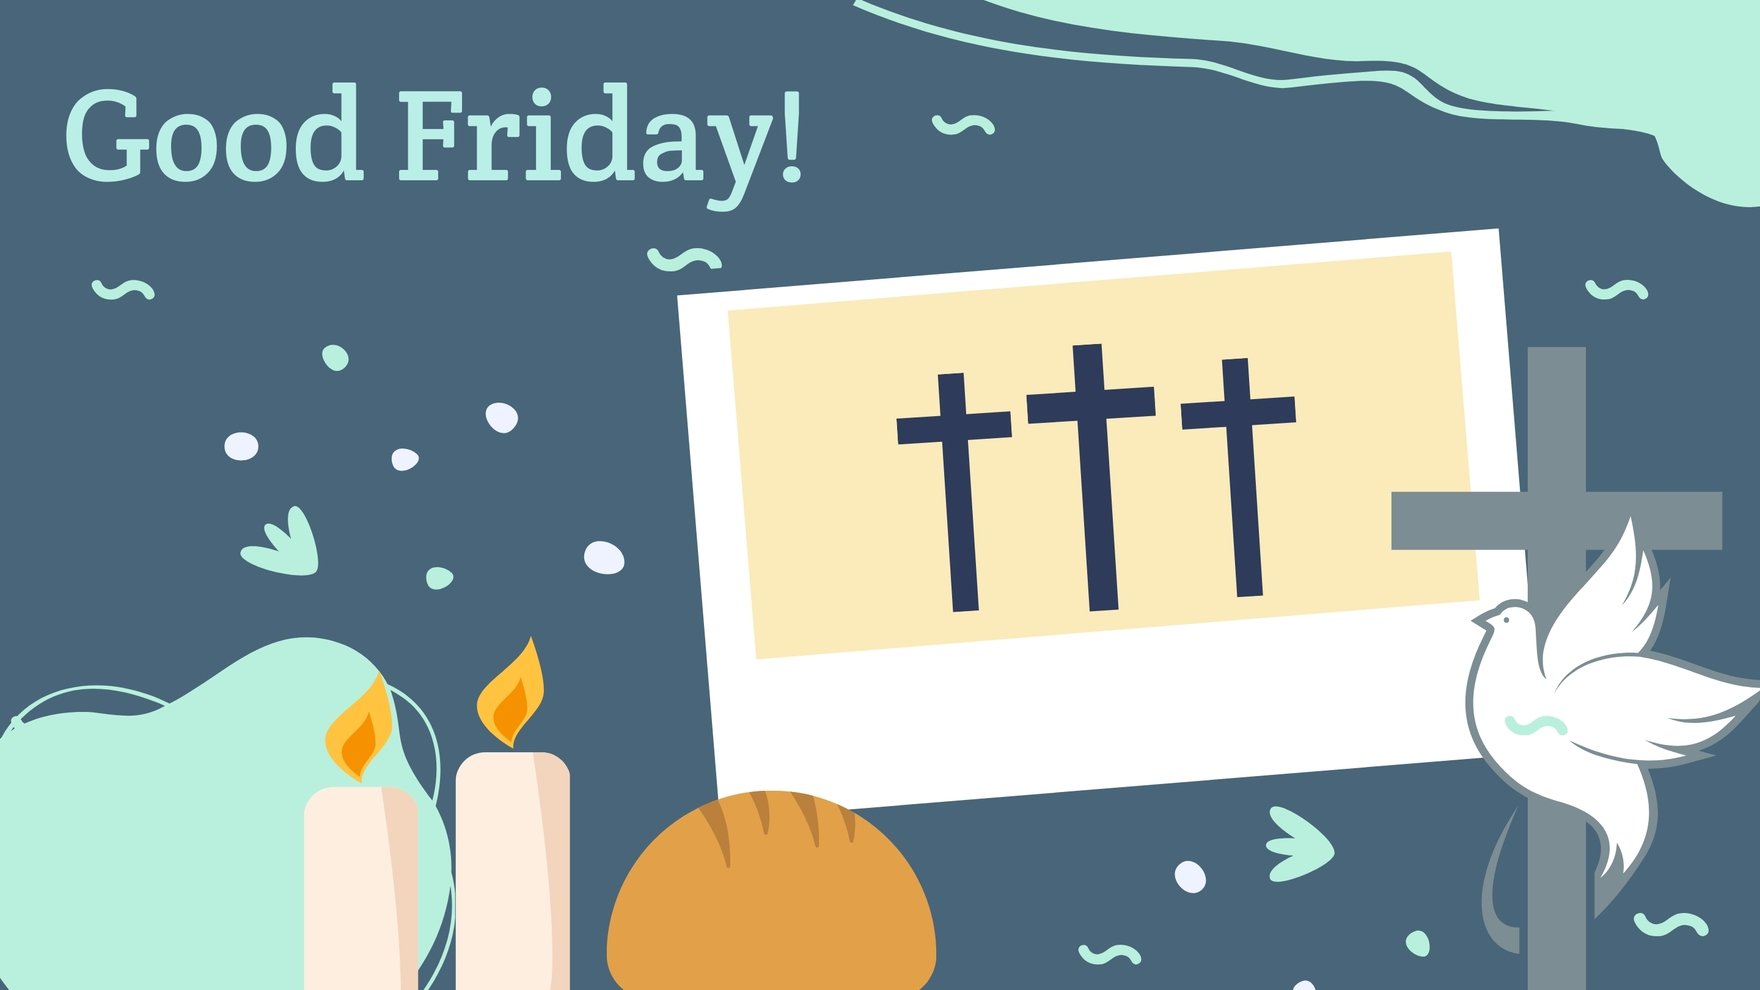 Free Good Friday Picture Background in PDF, Illustrator, PSD, EPS, SVG, JPG, PNG